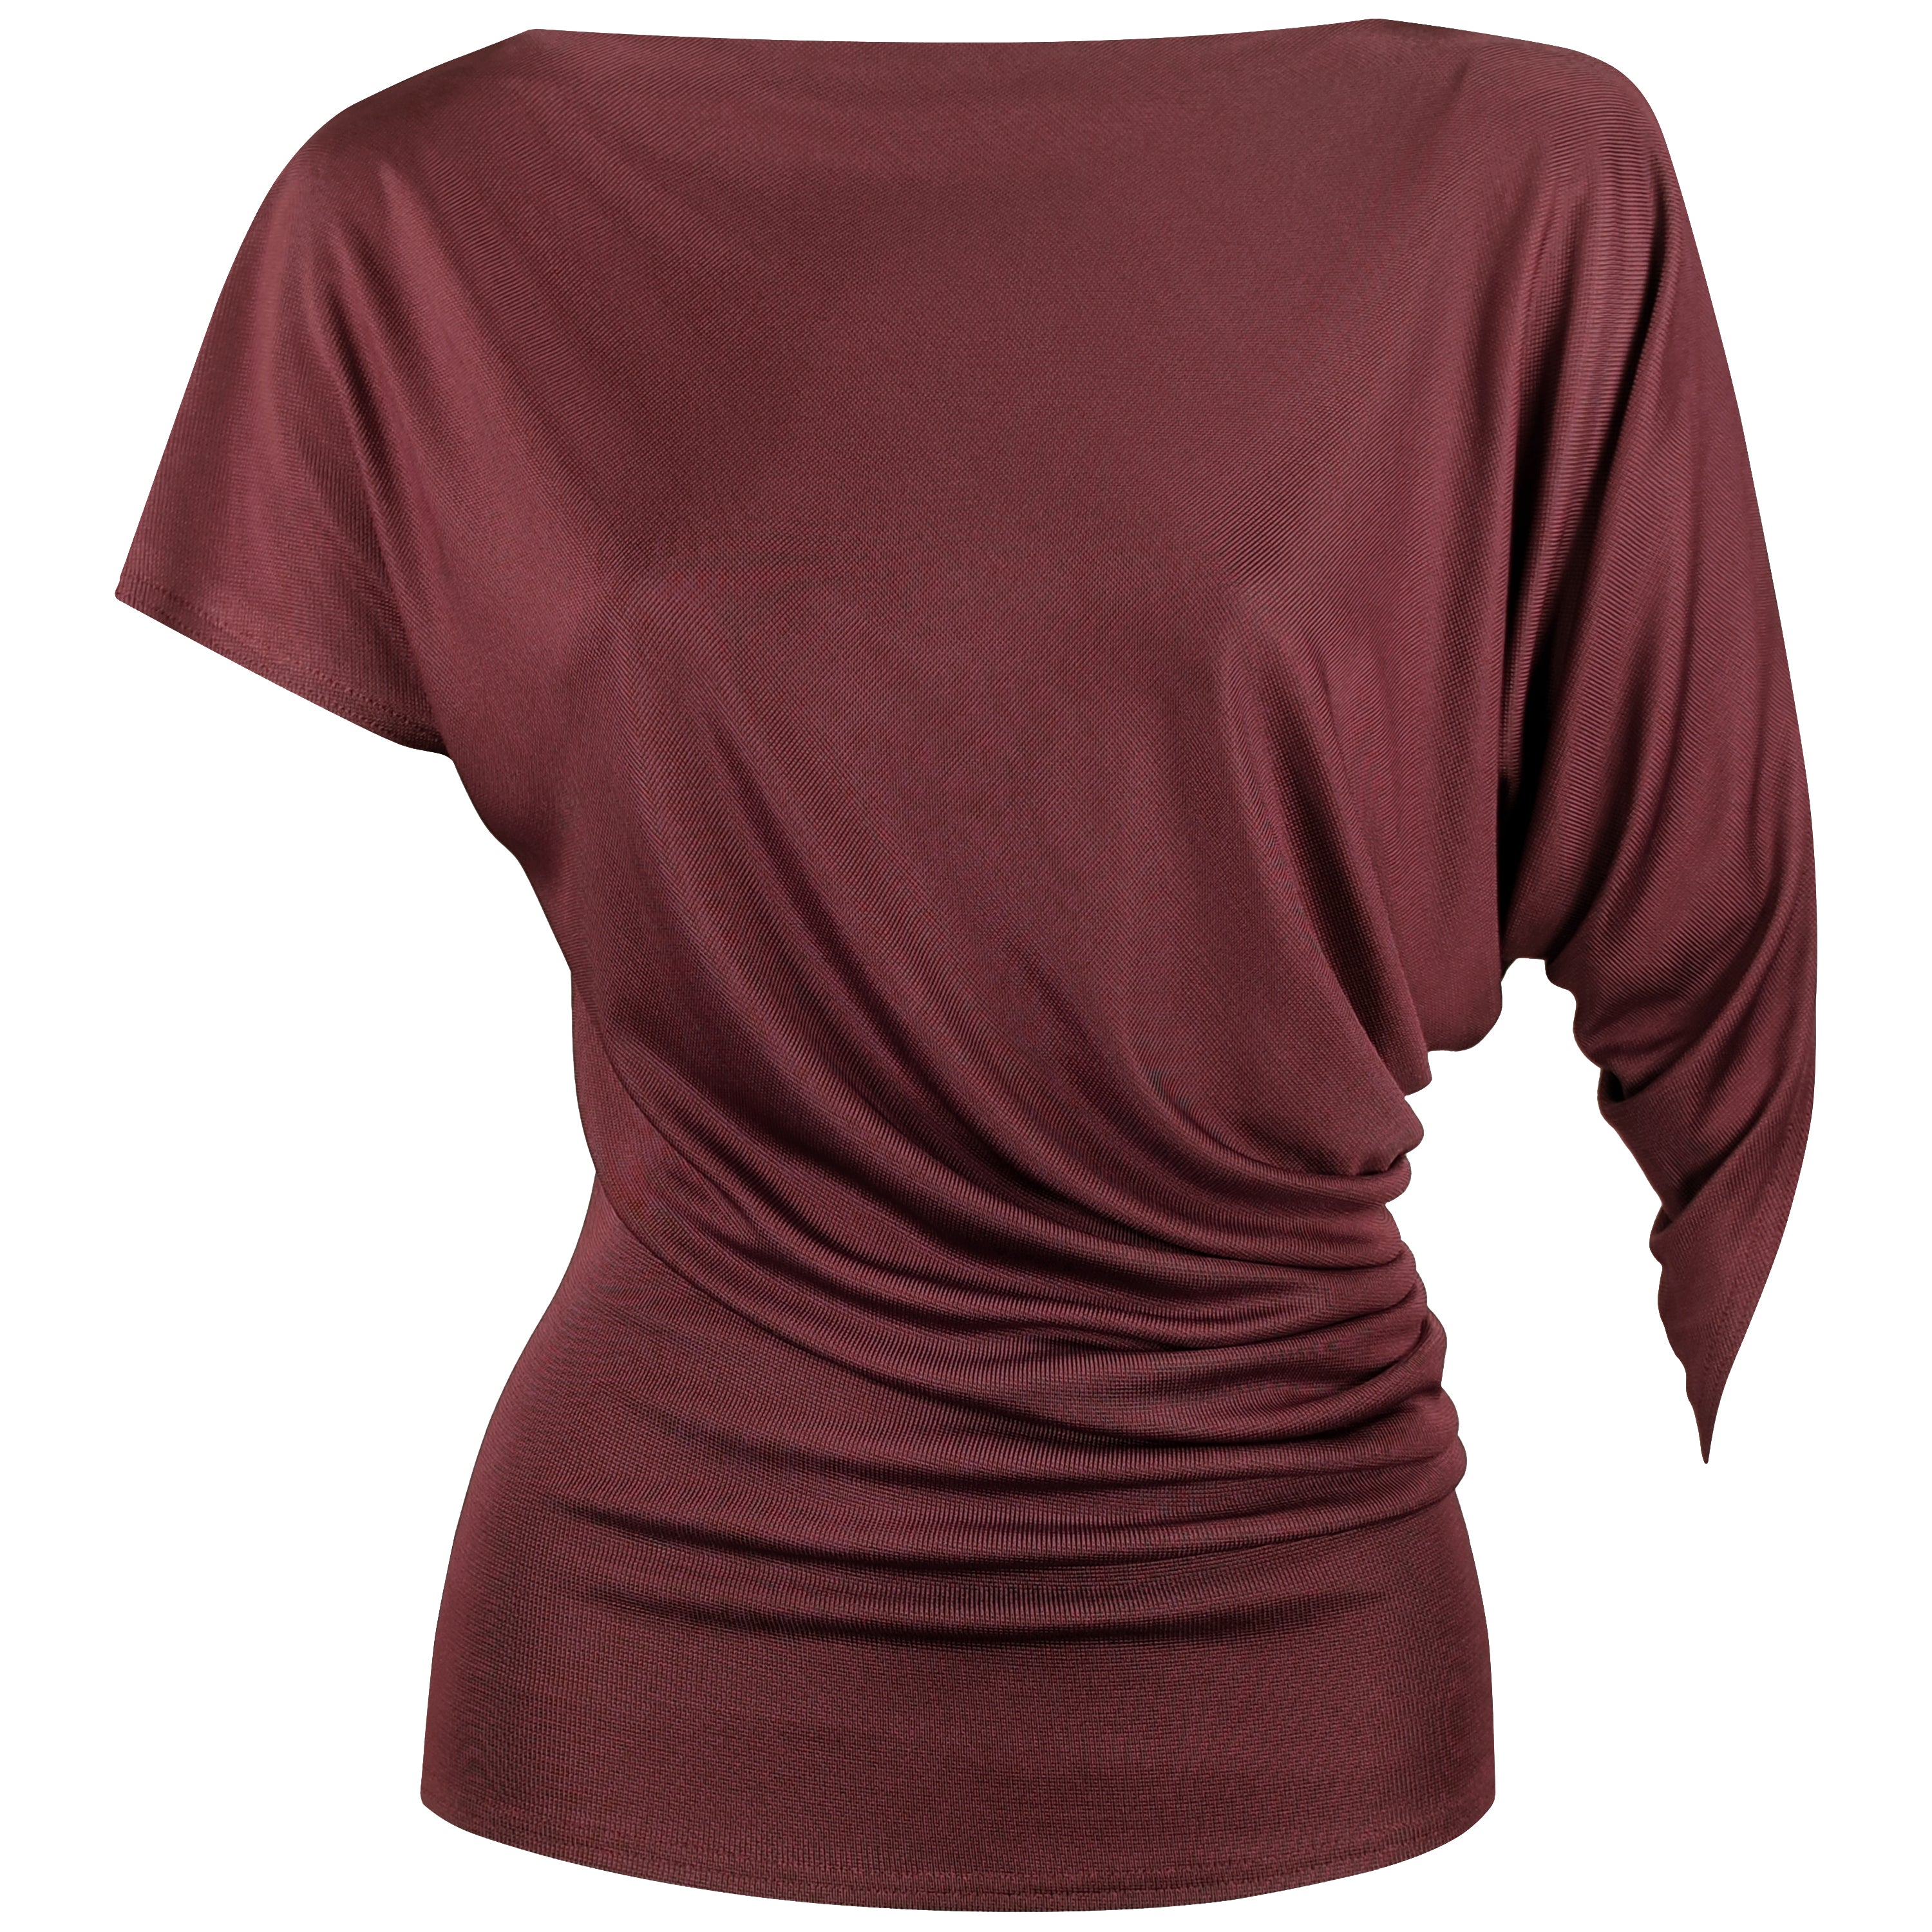 In Spades Claret A-symmetric Top By Me & Thee 